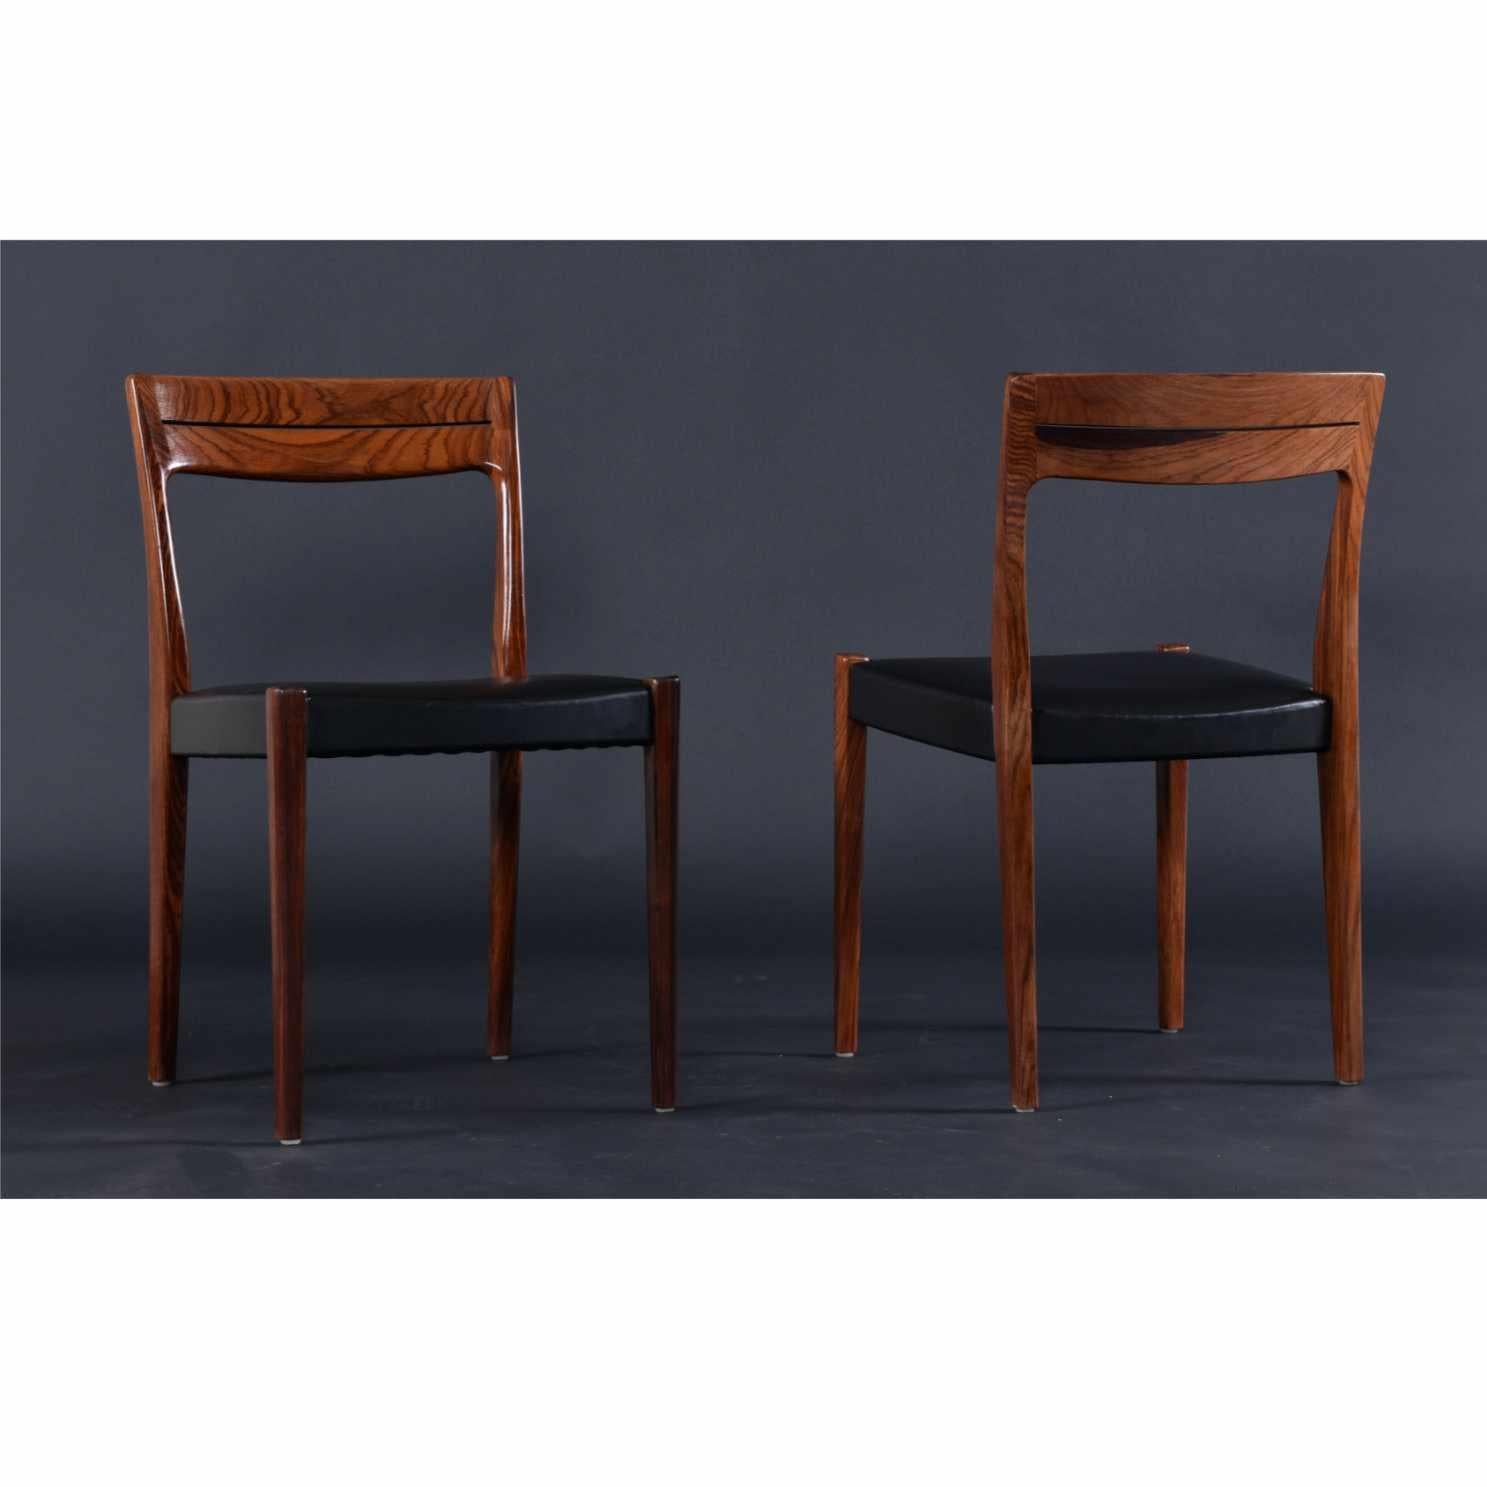 Swedish Svegards Markaryd Rosewood Dining Chairs Made in Sweden Set of 8